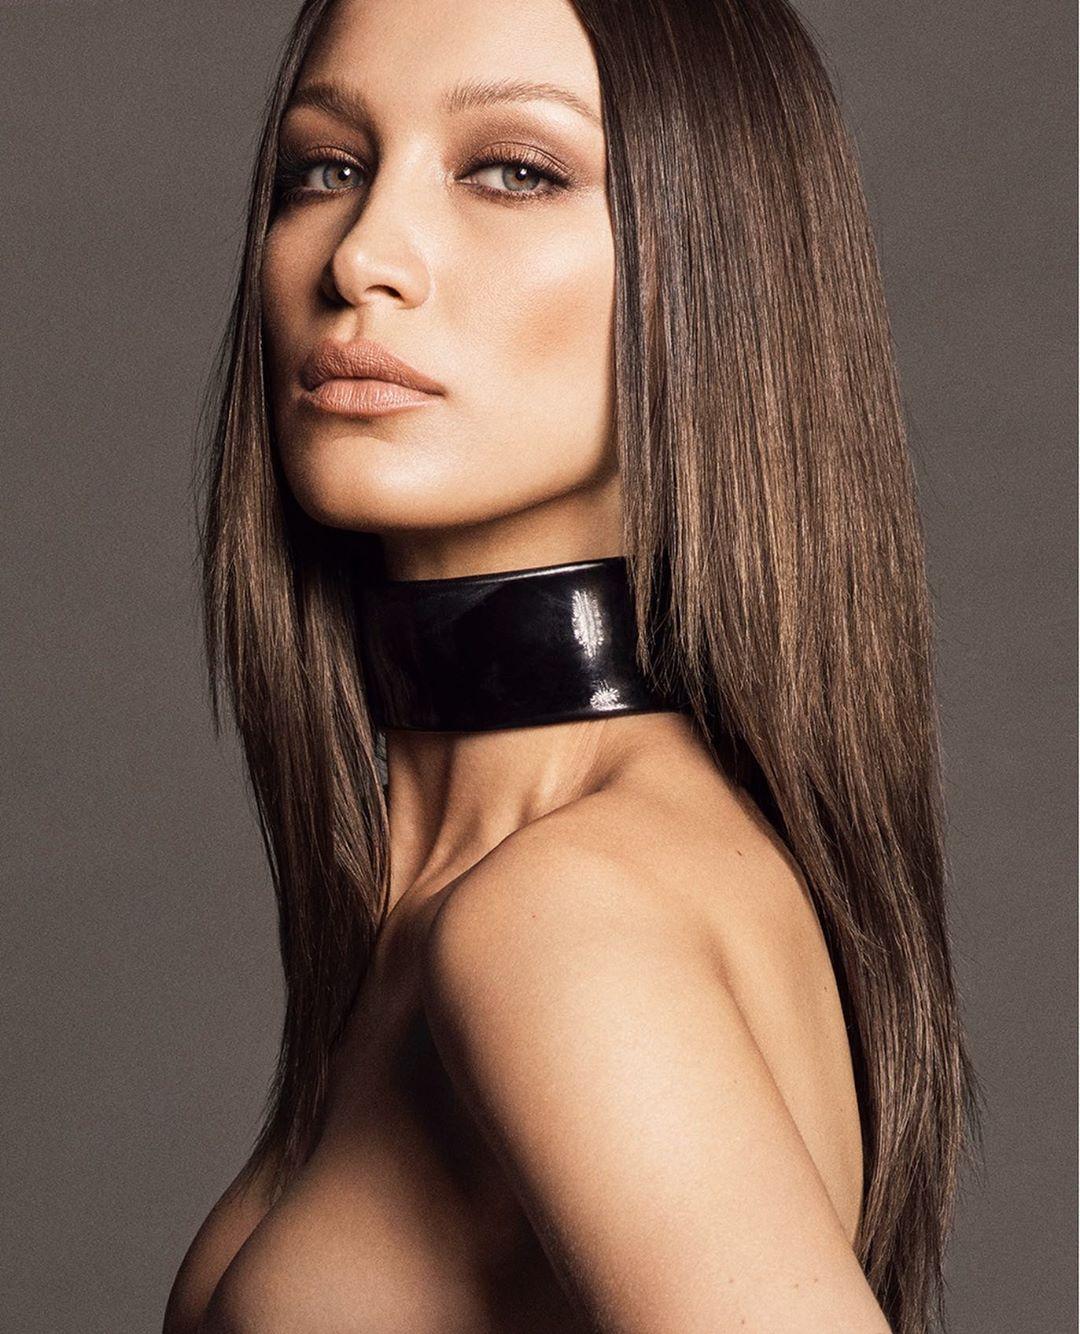 70+ Hot Pictures Of Bella Hadid Prove That Is A Majestic Beauty 21